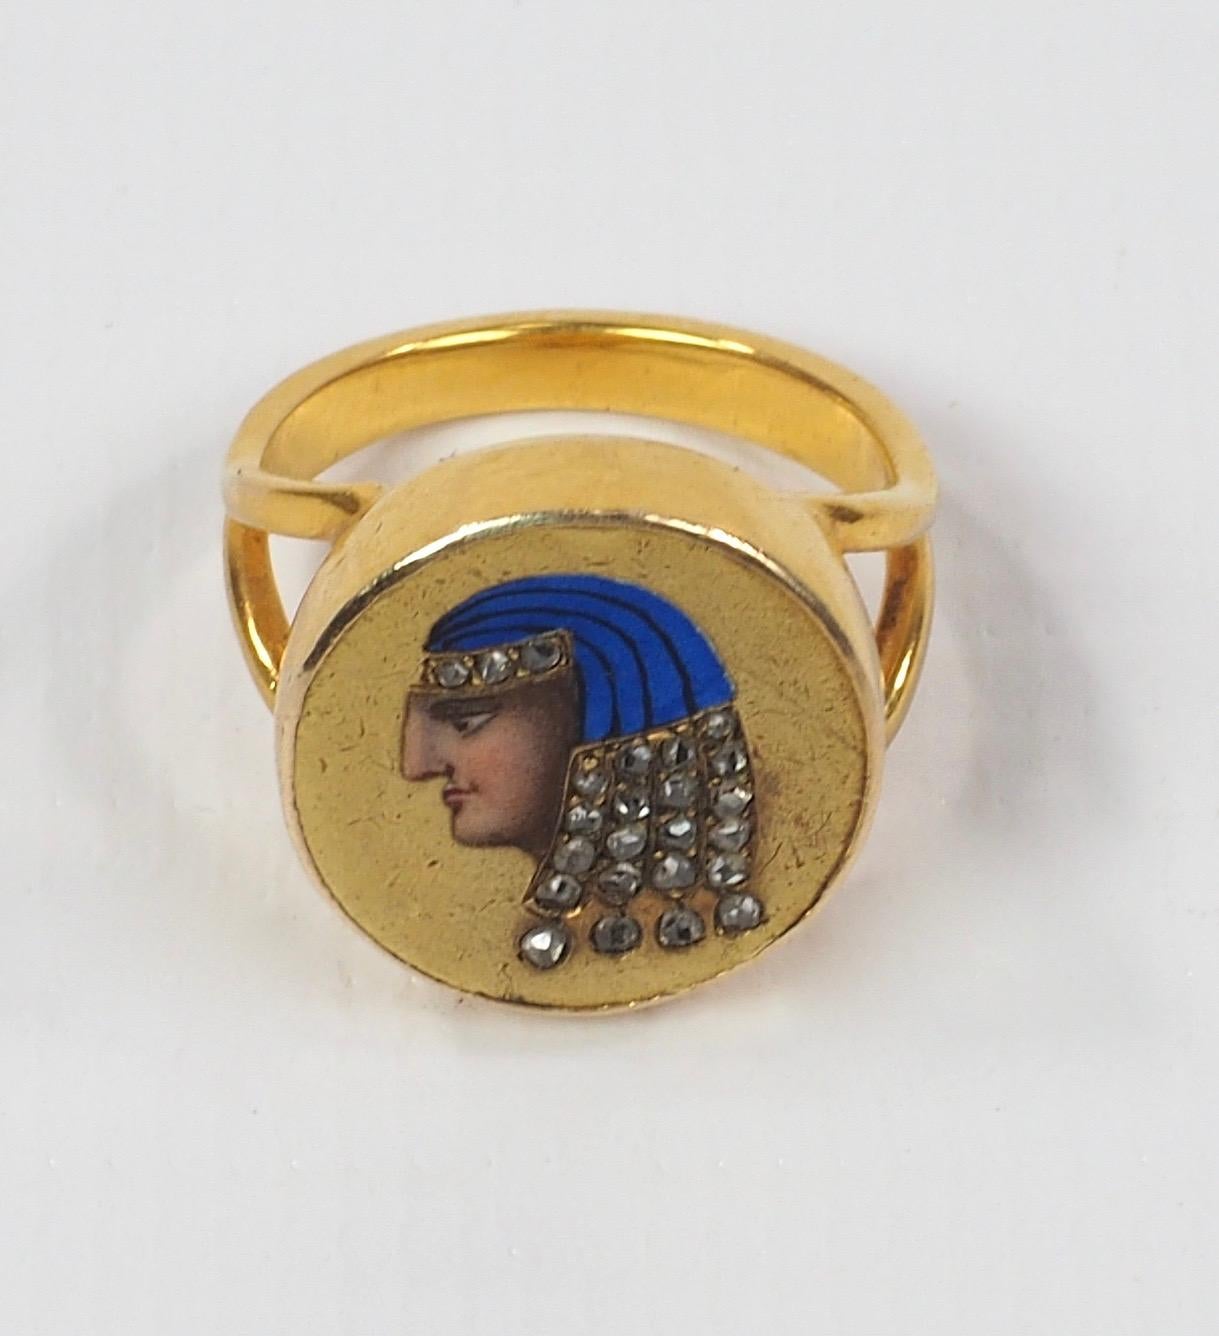 A fabulous late 19th century enamel and diamond ring depicting an Egyptian head. The ring is accented with 24 old rose-cut diamonds, gold mounted and finely enamelled. 
From the collection of Edith Weber Antique Jewelry. Jewelry from Edith Weber was